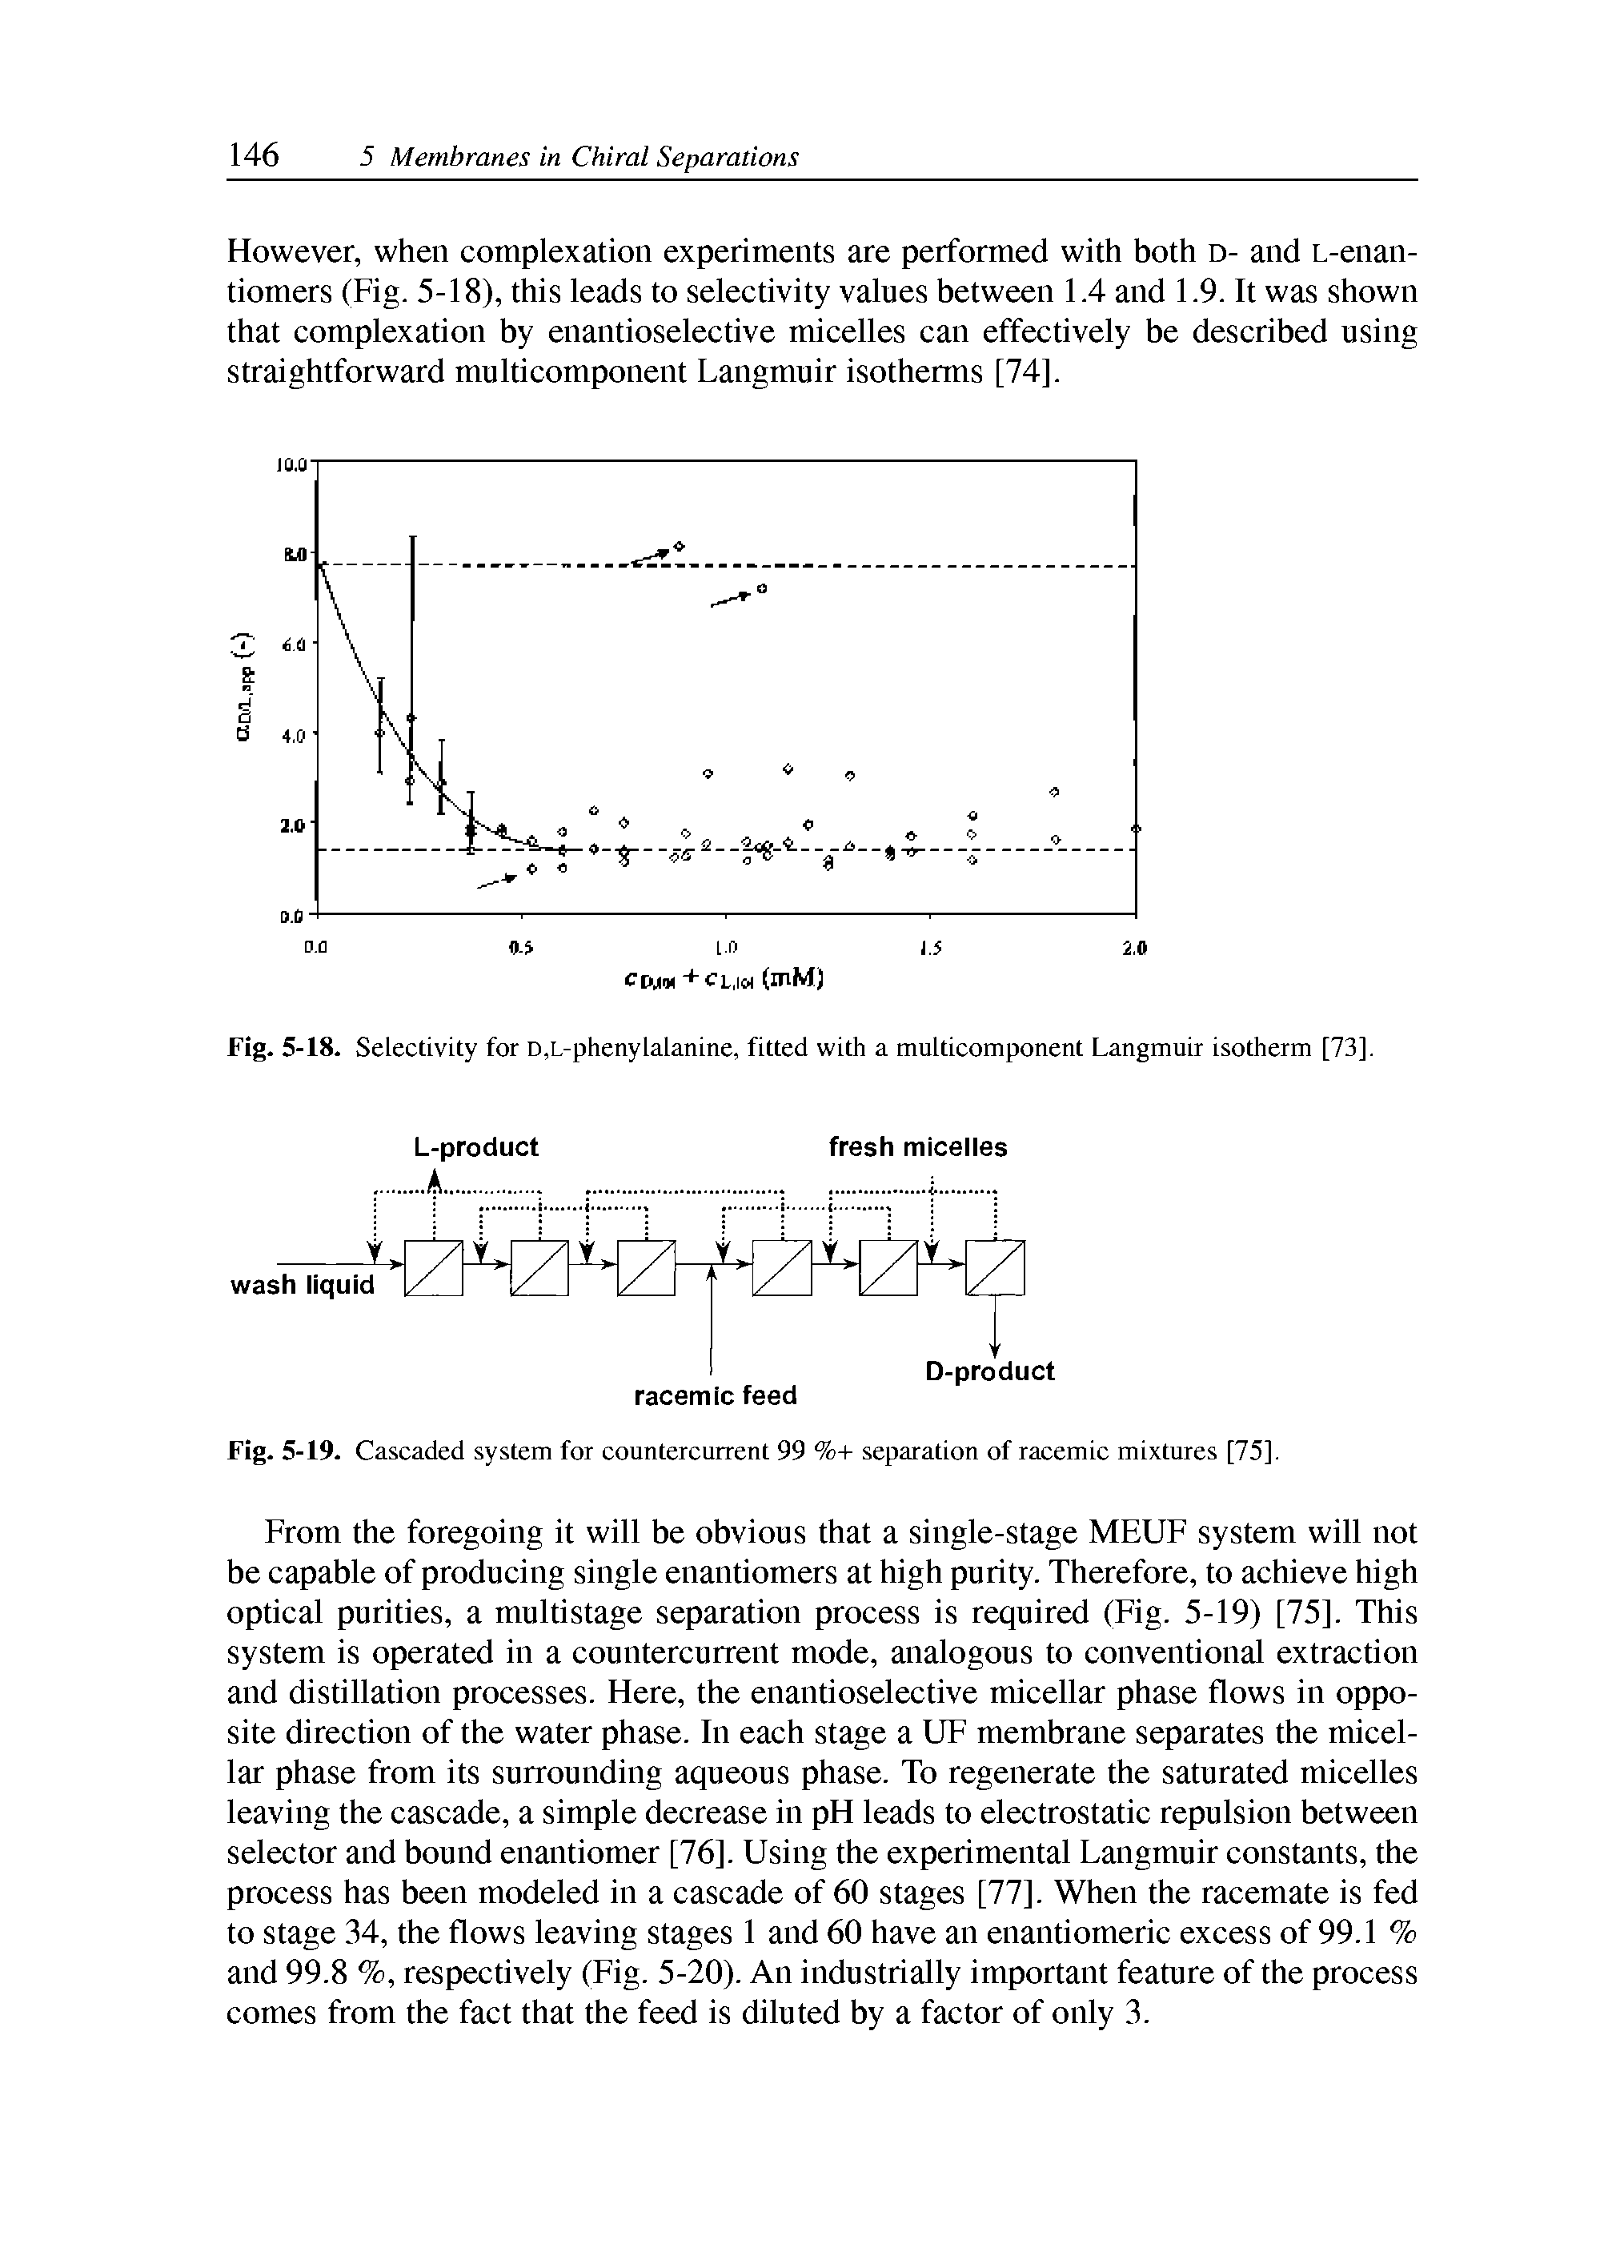 Fig. 5-19. Cascaded system for countercurrent 99 %+ separation of racemic mixtures [75].